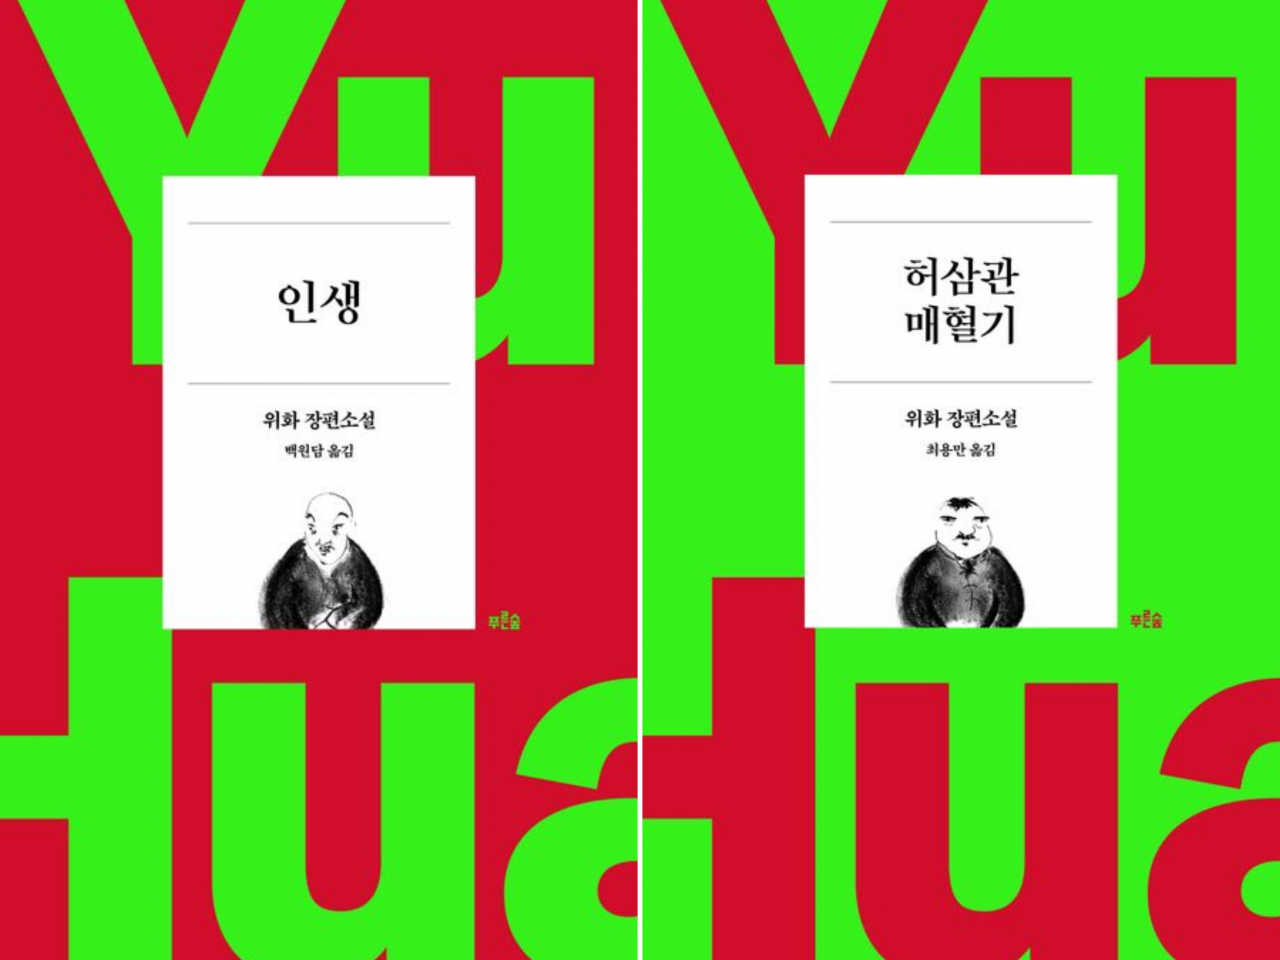 The Korean editions of 